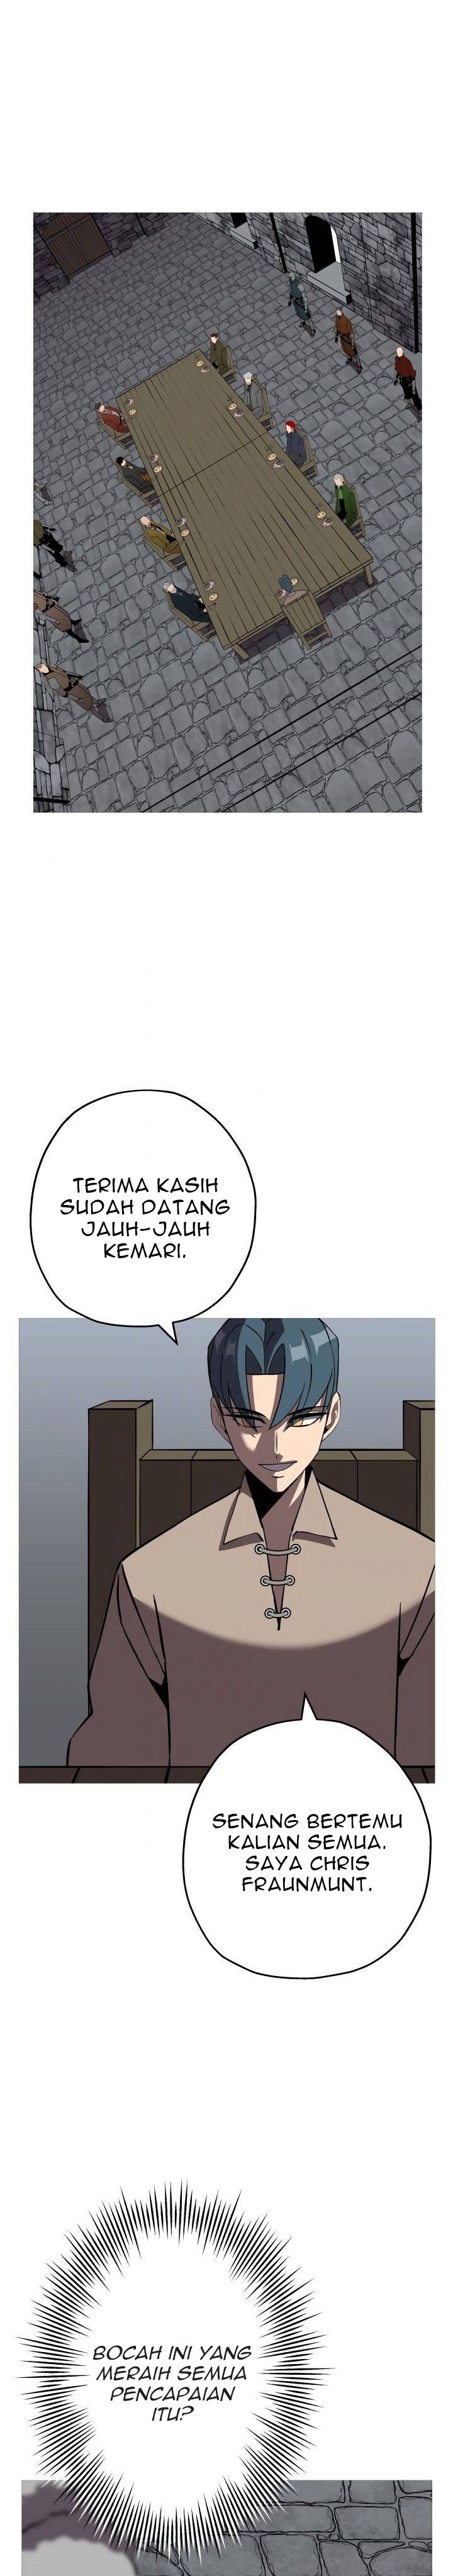 Dilarang COPAS - situs resmi www.mangacanblog.com - Komik the story of a low rank soldier becoming a monarch 061 - chapter 61 62 Indonesia the story of a low rank soldier becoming a monarch 061 - chapter 61 Terbaru 18|Baca Manga Komik Indonesia|Mangacan